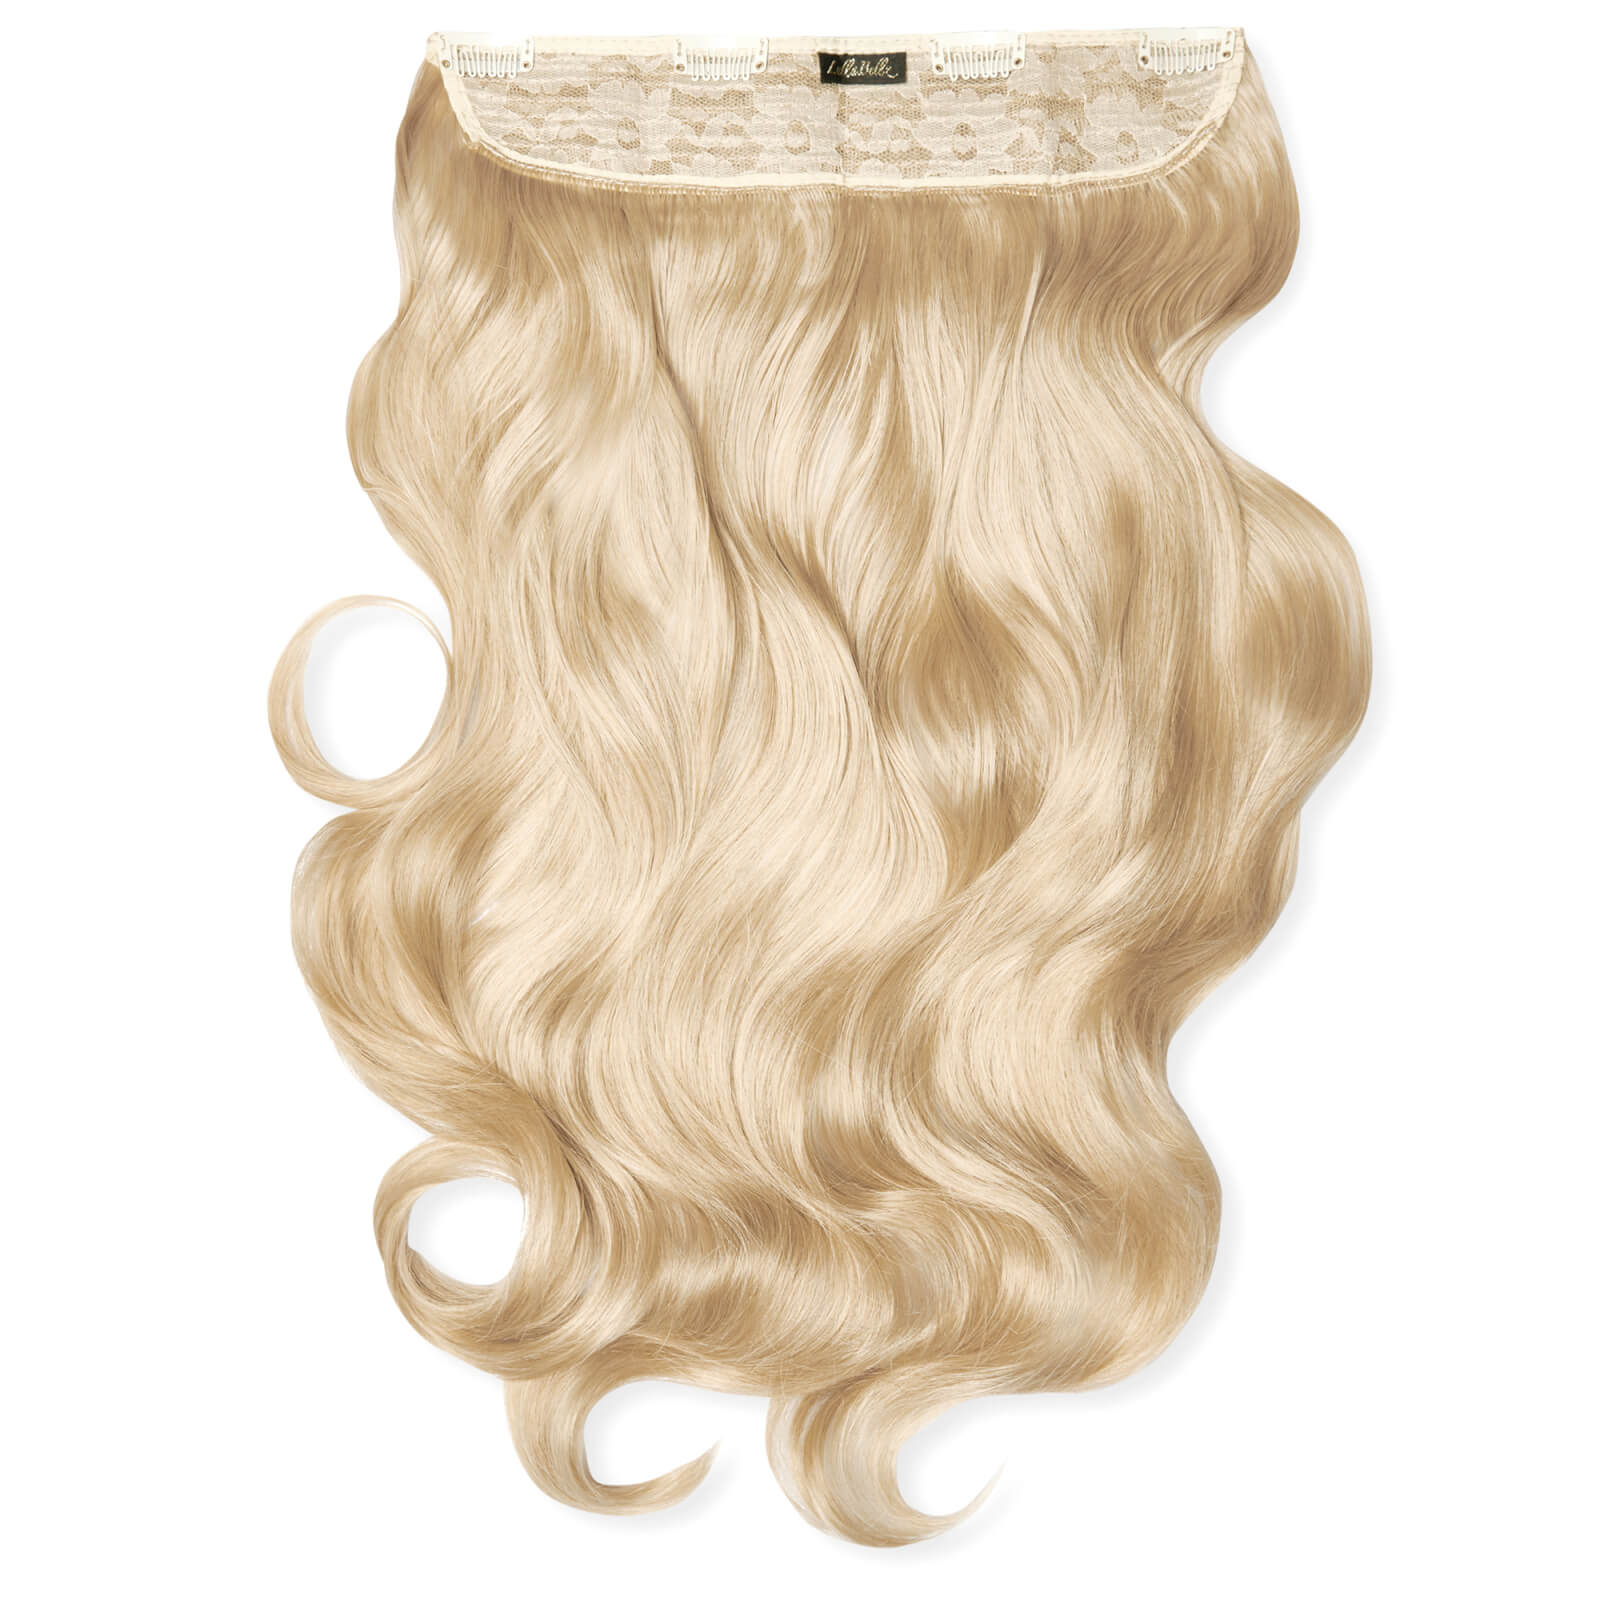 LullaBellz Thick 20 1-Piece Curly Clip in Hair Extensions (Various Colours) - Light Blonde von Lullabellz